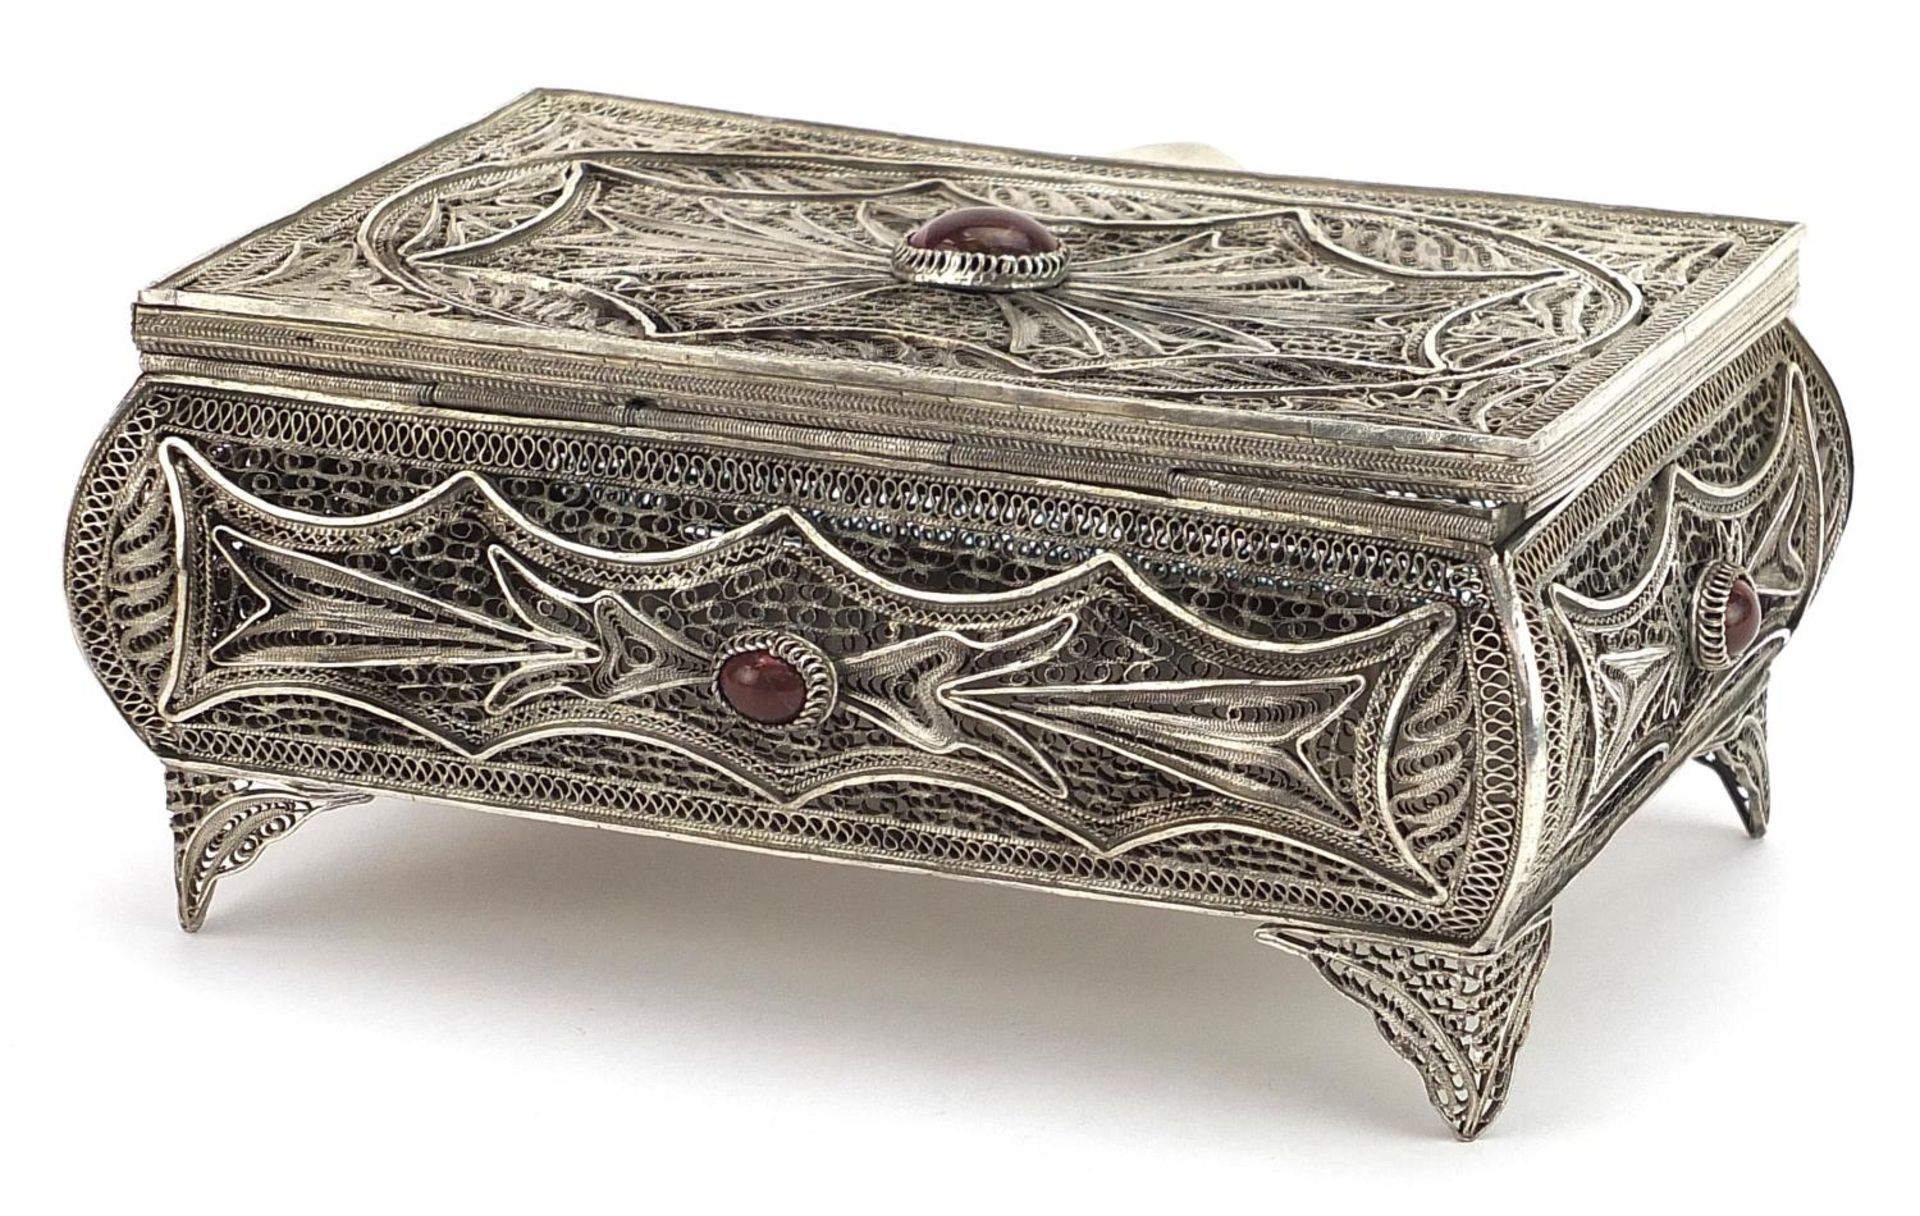 Russian silver filigree casket with hinged lid set with cabochon hardstones, 7cm H x 16cm W x 10.5cm - Image 2 of 4